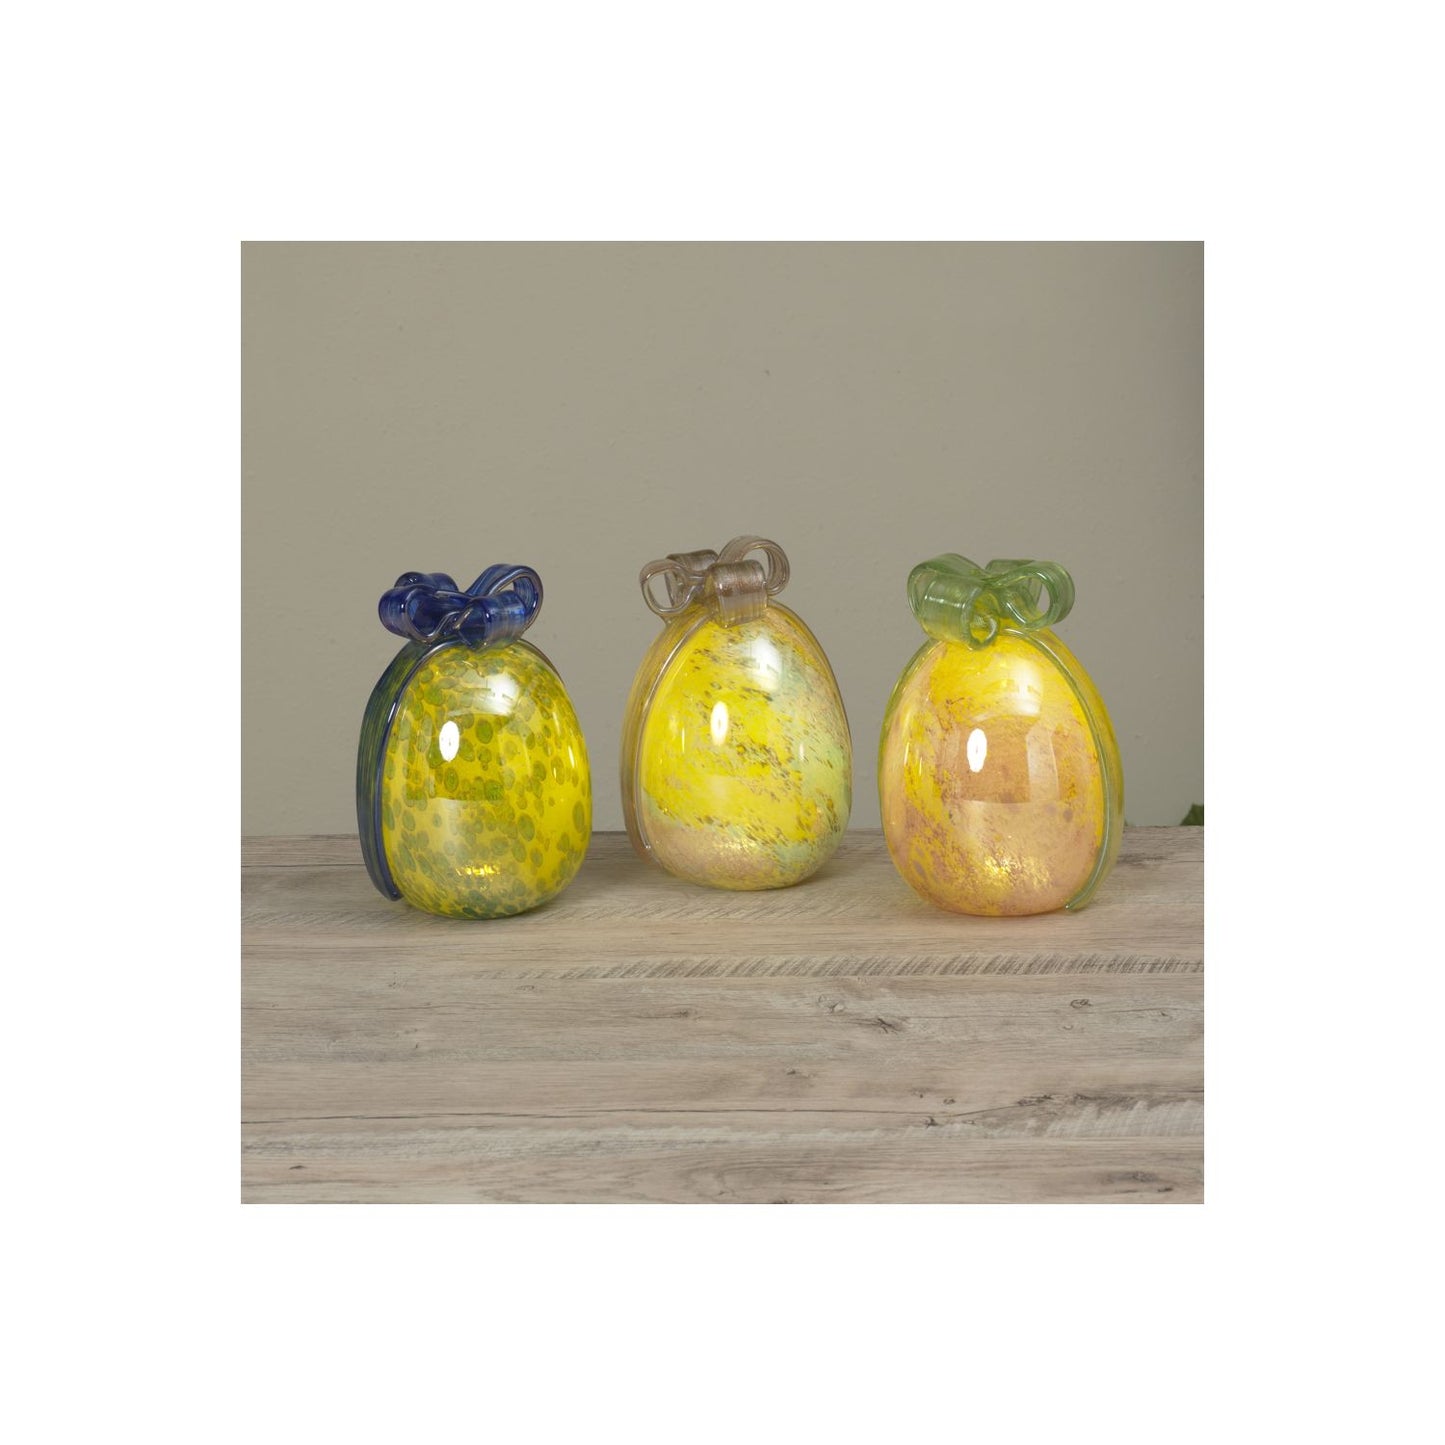 Gerson 8.5"H B/O Lighted Handblown Glass Easter Egg W/ Ribbon, 3 Assorted